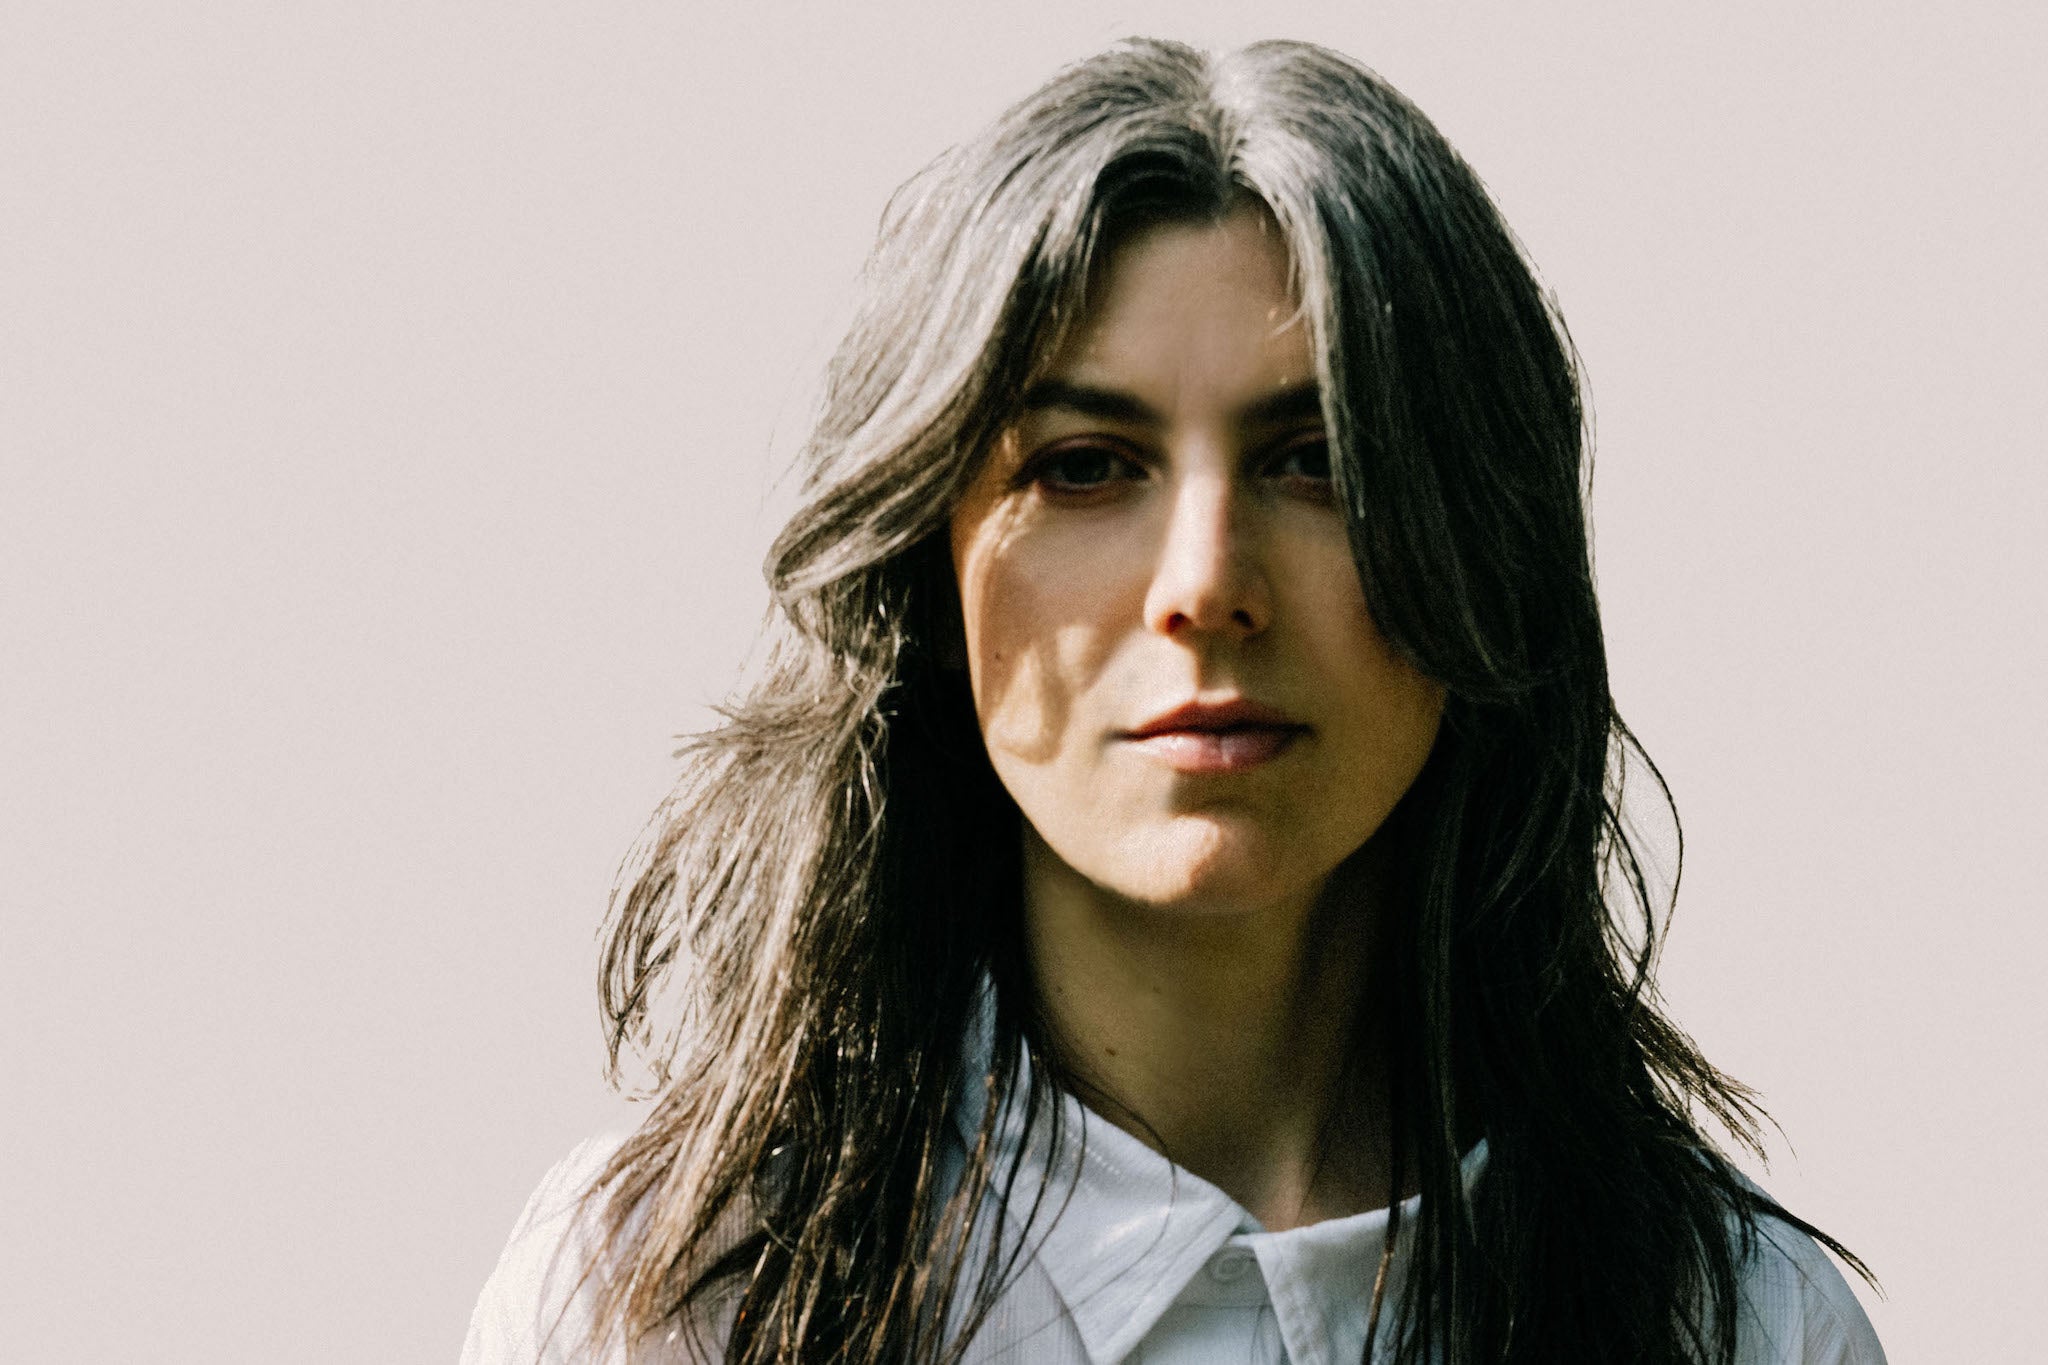 Julia Holter releases her sixth album ‘Something in the Room She Moves’ on 22 March